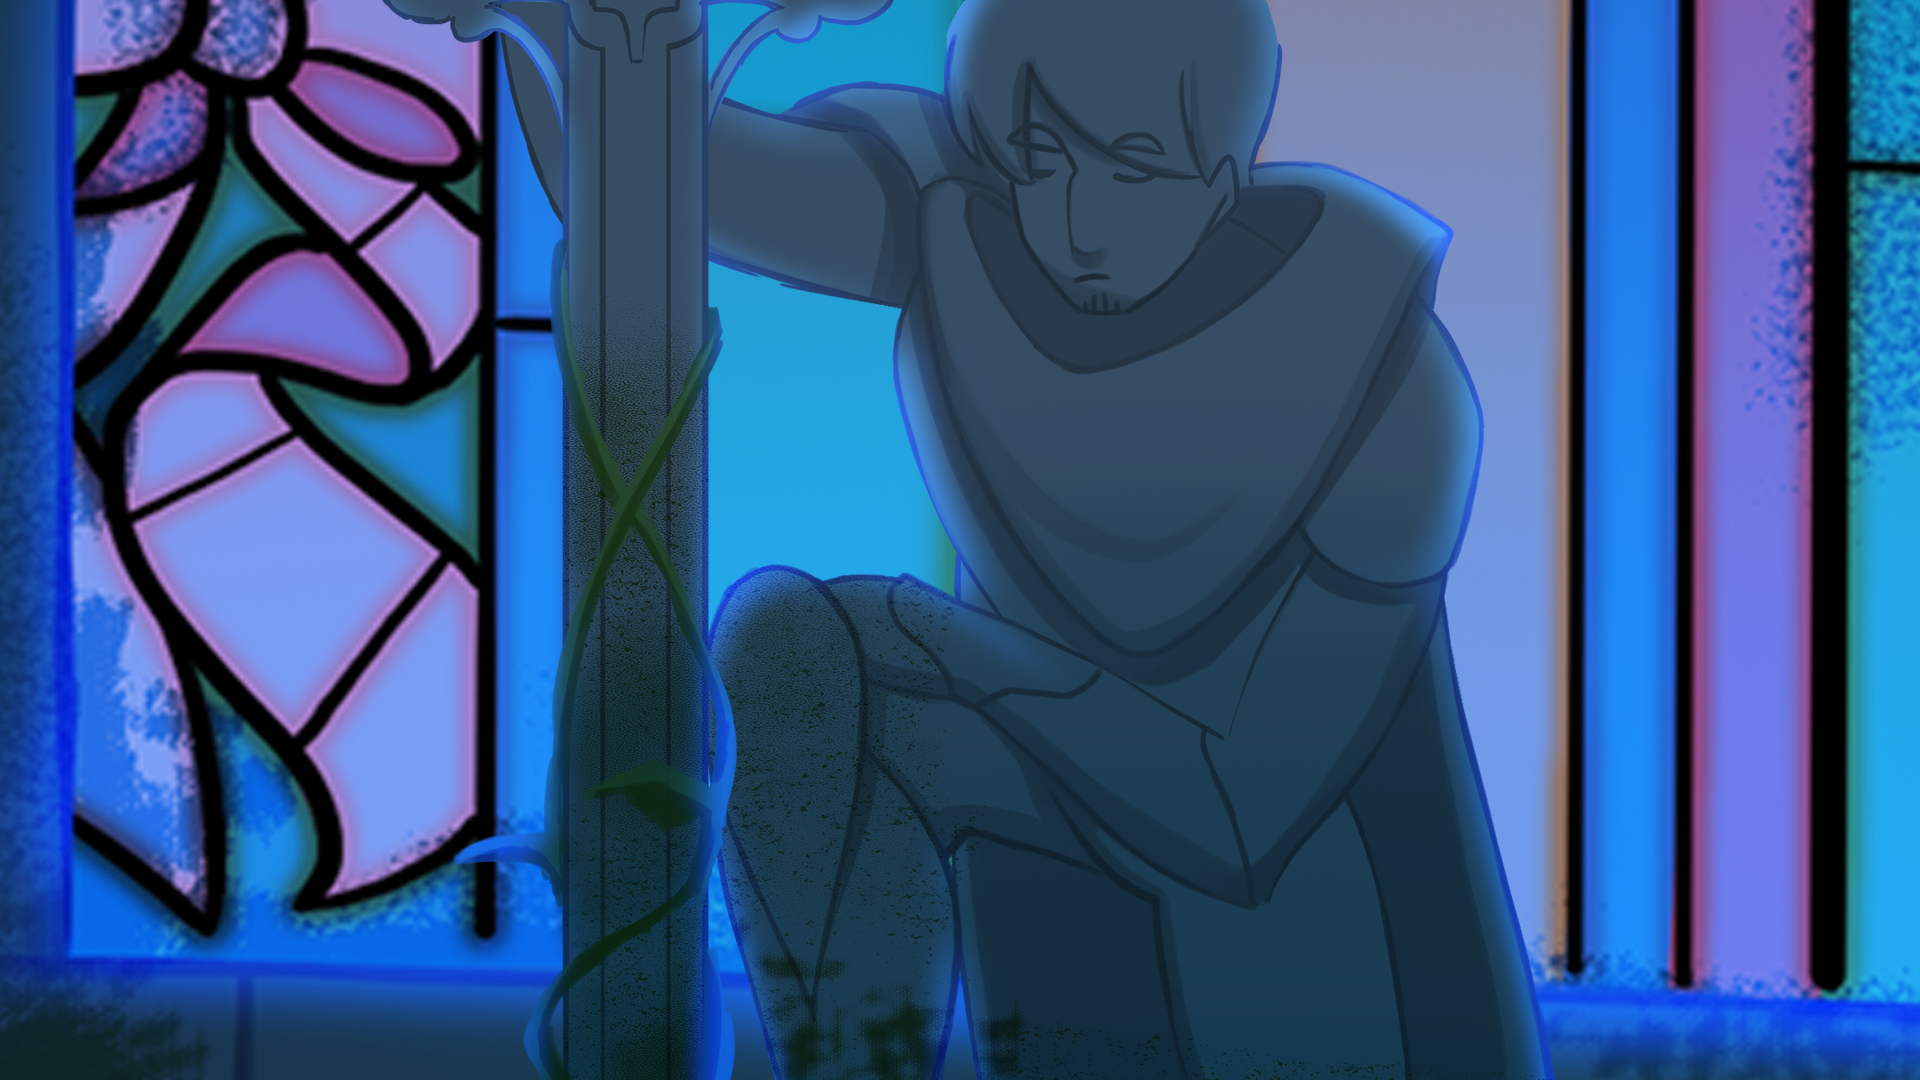 Background of the knight in the temple. He is a statue. Behind him, stained glass in shades of blue and pink is visible.